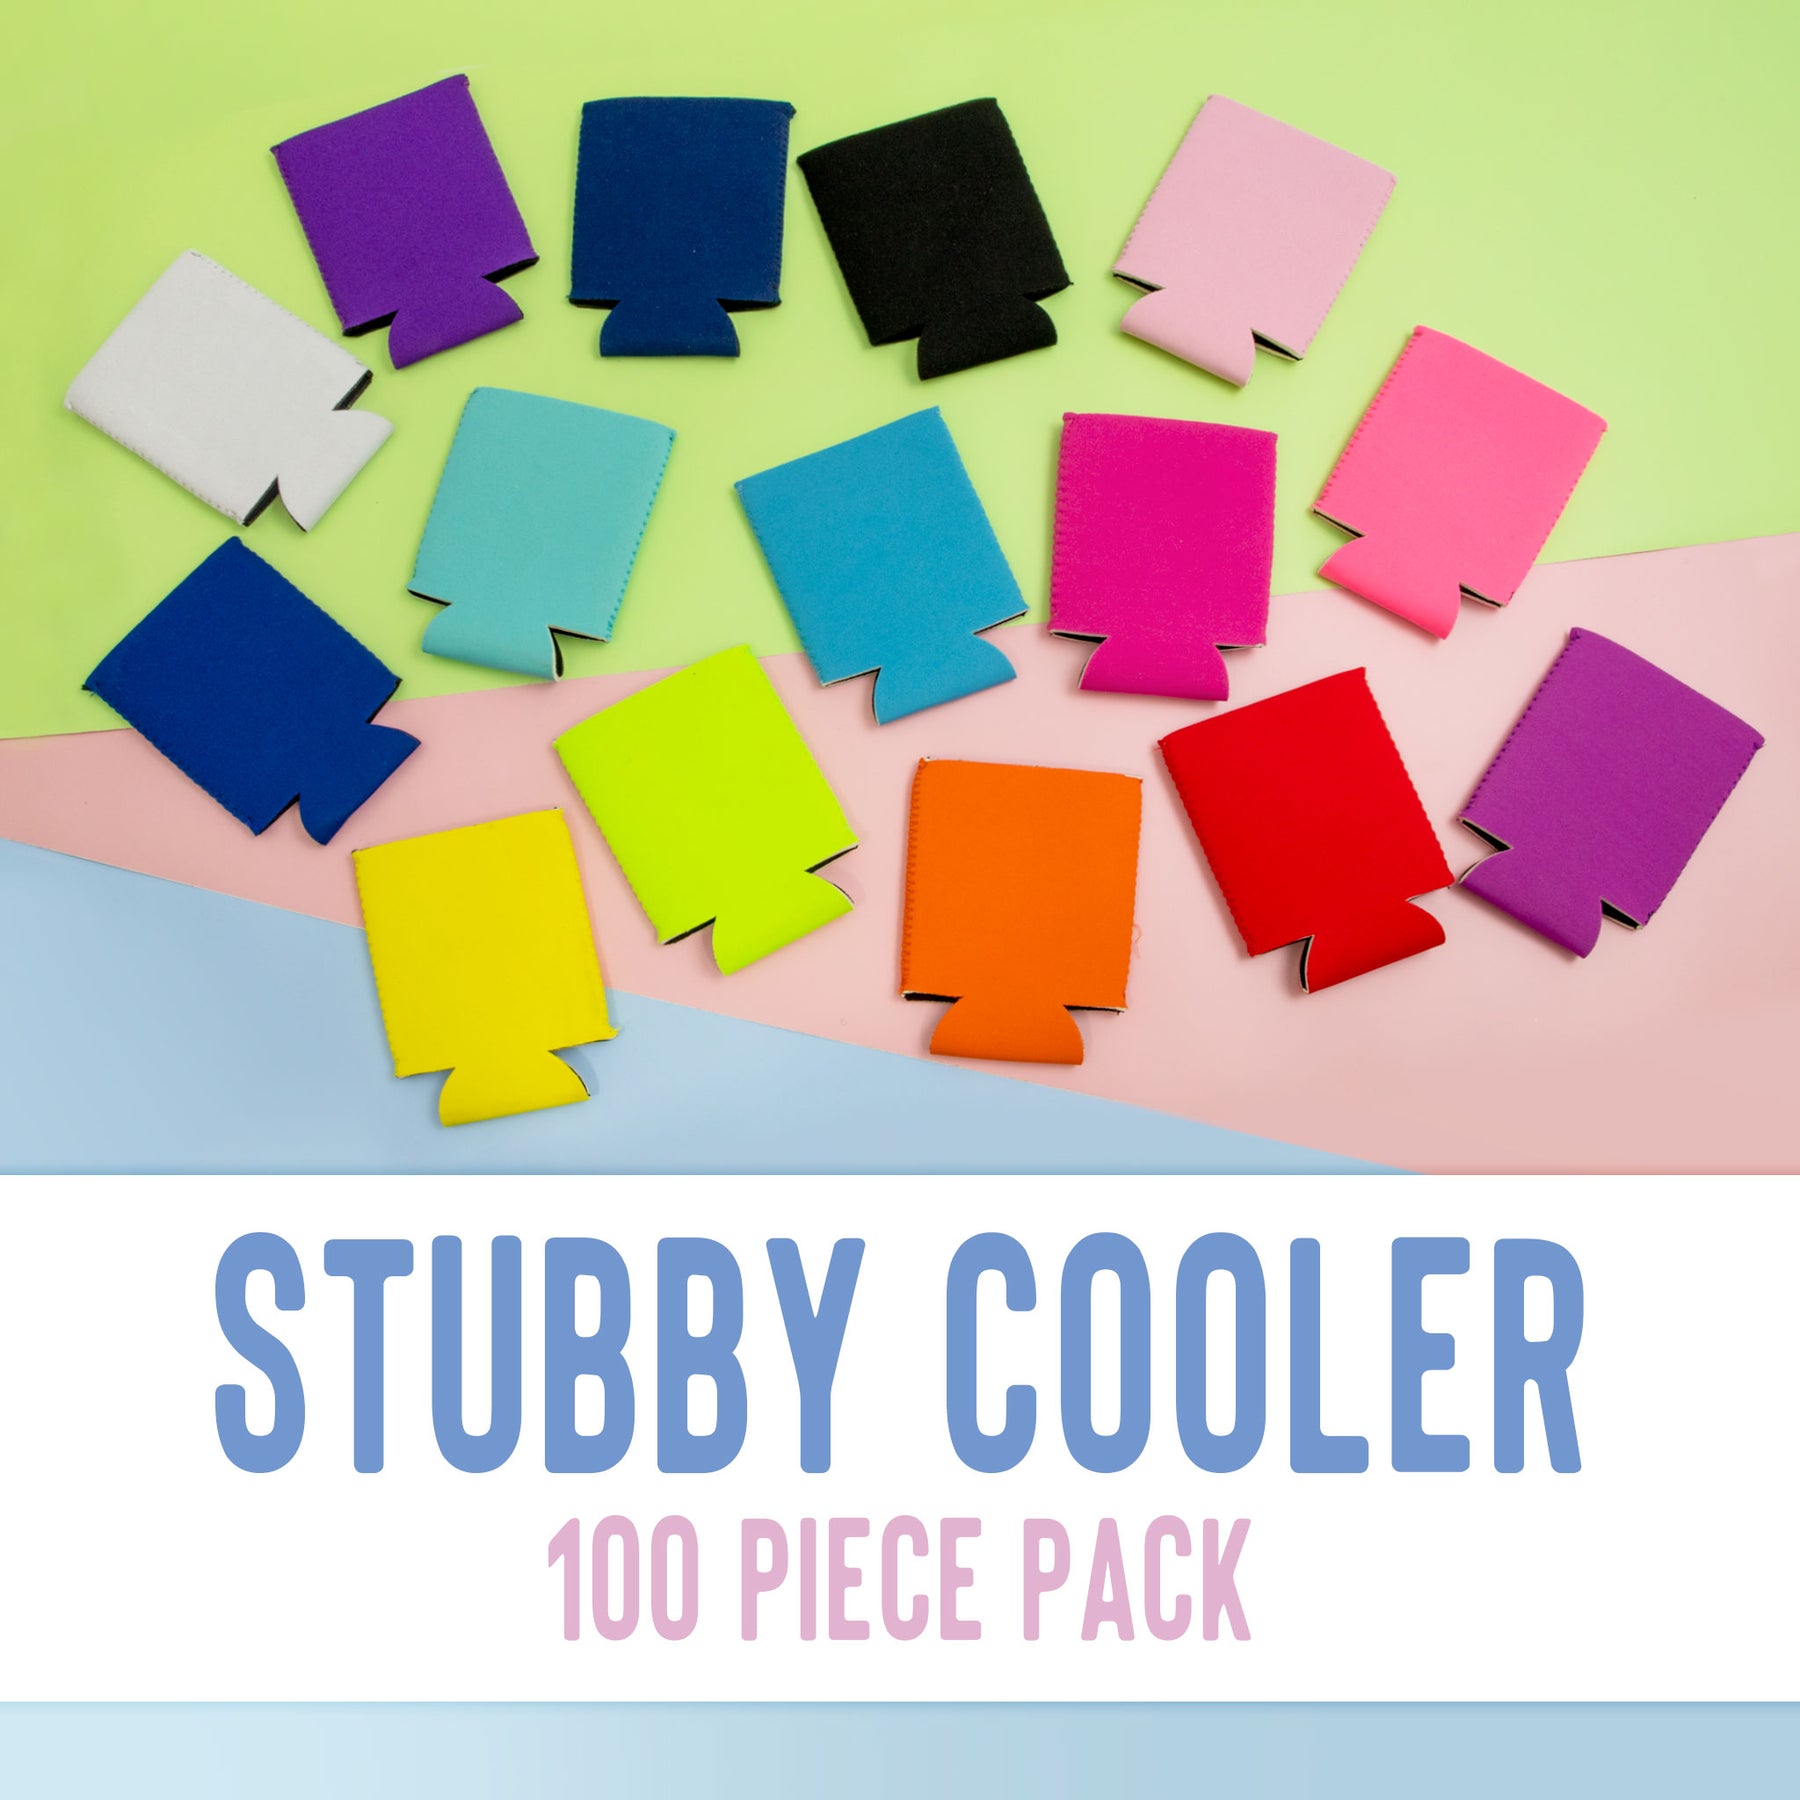 Blank Stubby Coolers - 100pce pack